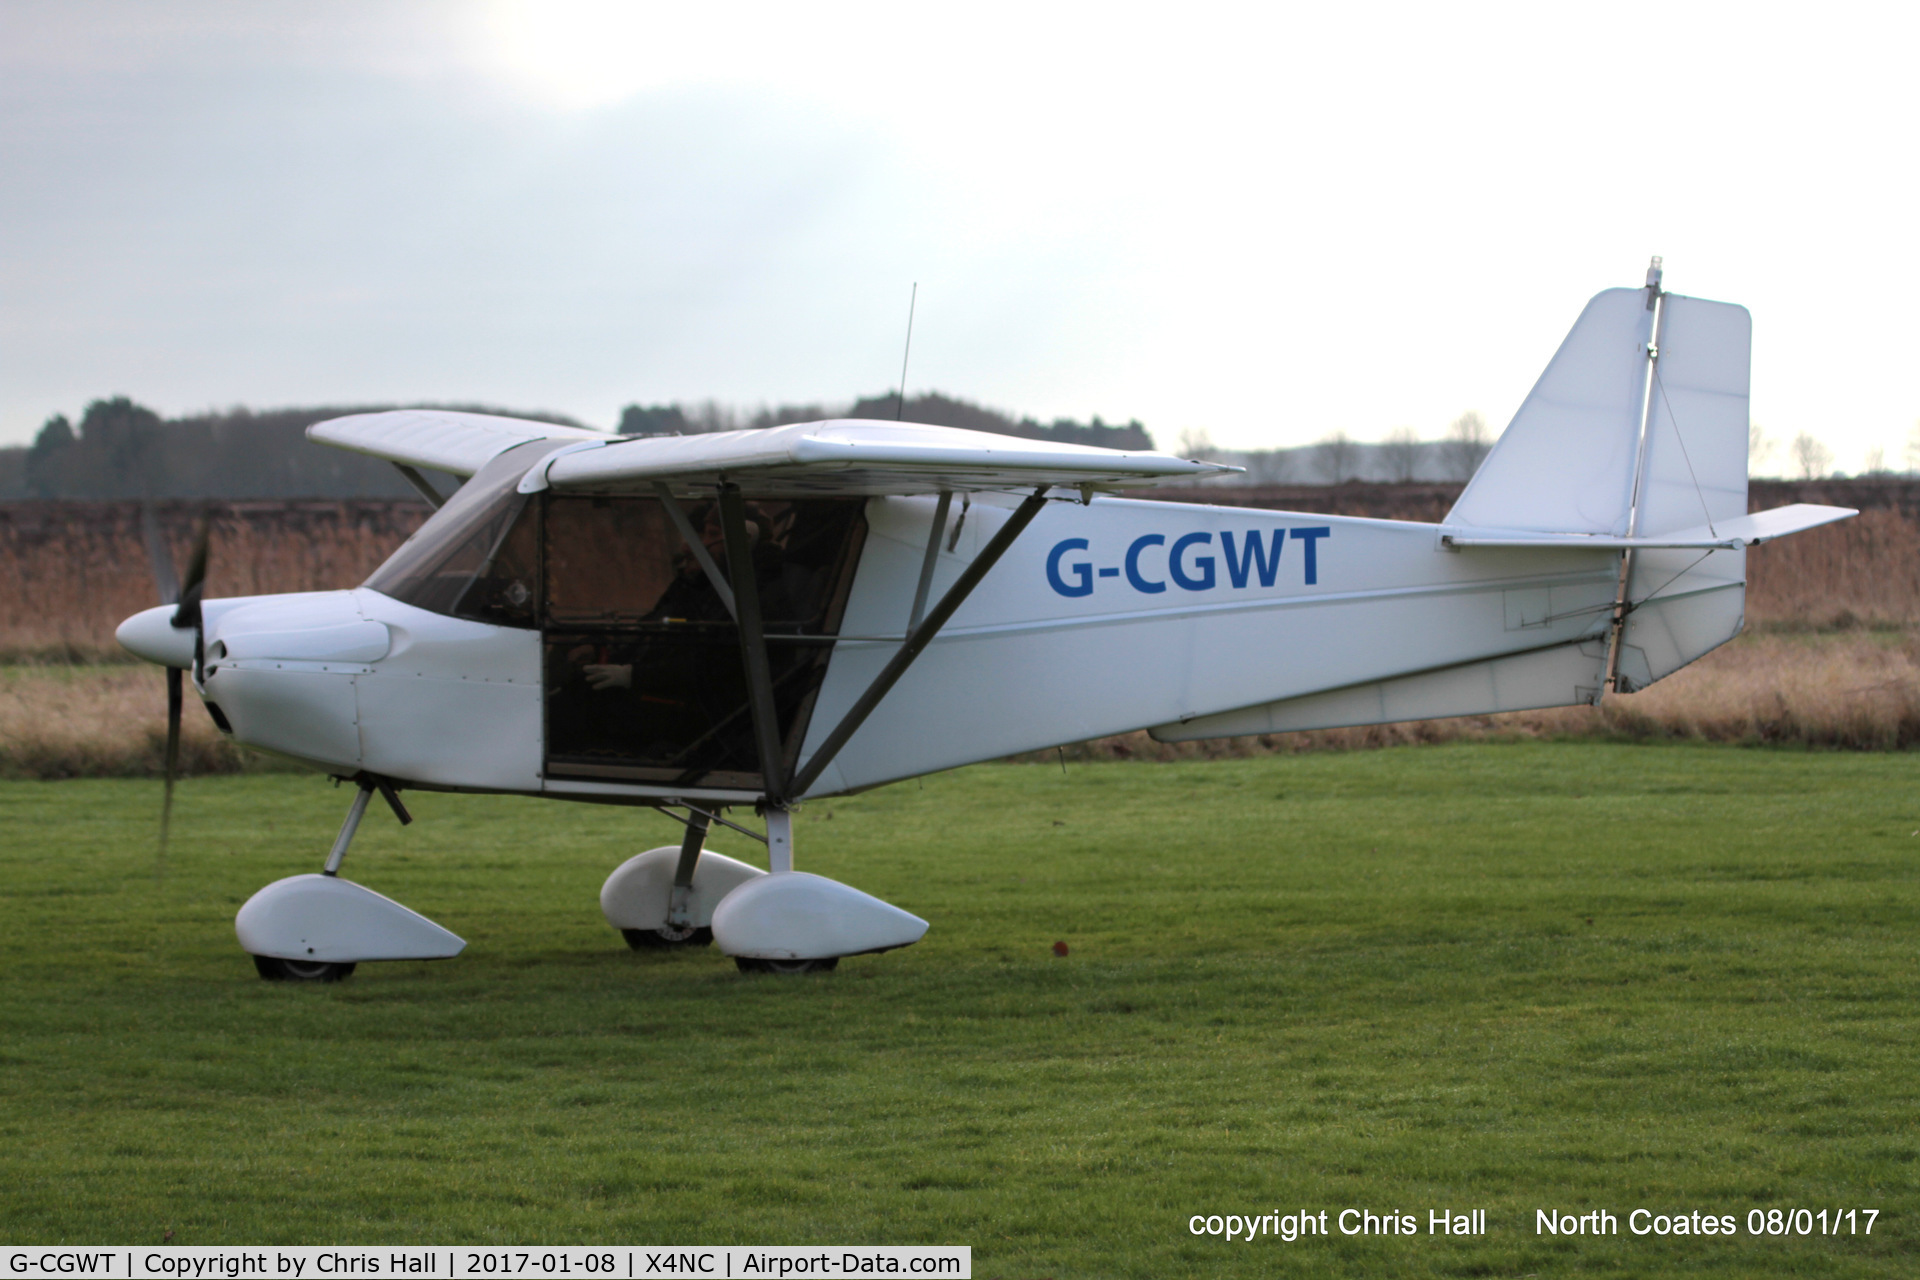 G-CGWT, 2008 Best Off SkyRanger Swift 912(1) C/N BMAA/HB/567, at the Brass Monkey fly in, North Coates